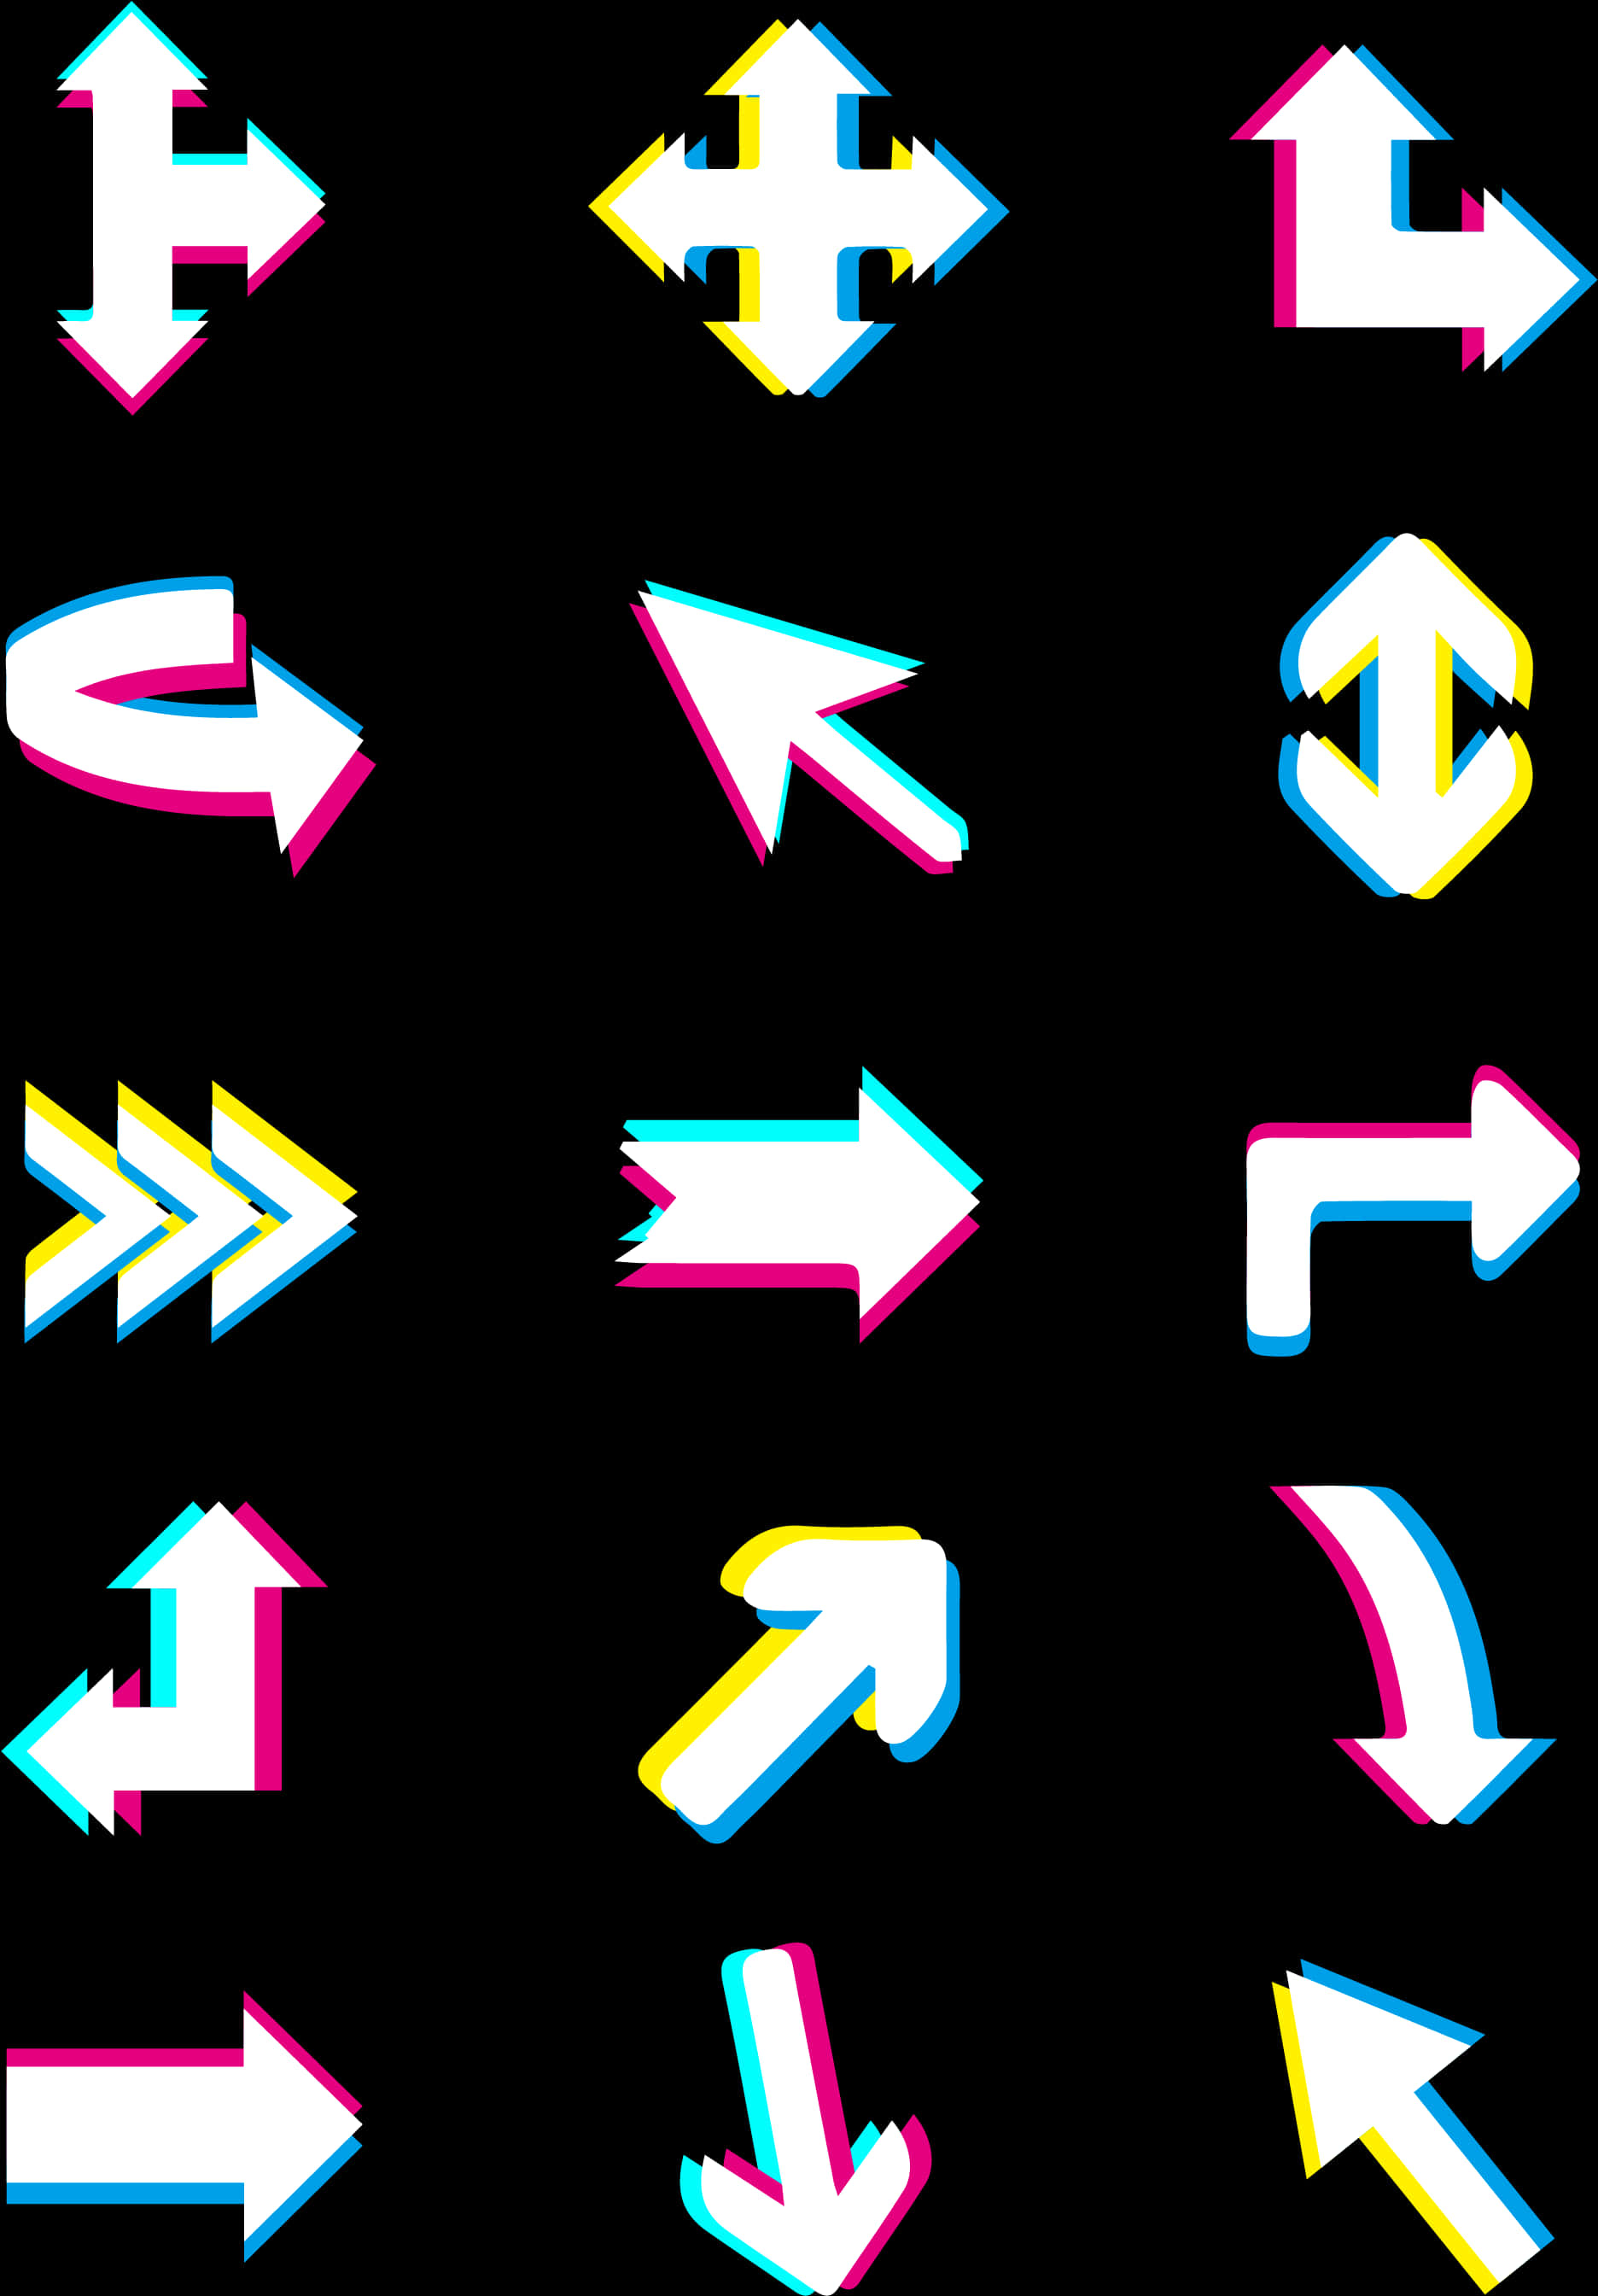 A Group Of Arrows On A Black Background